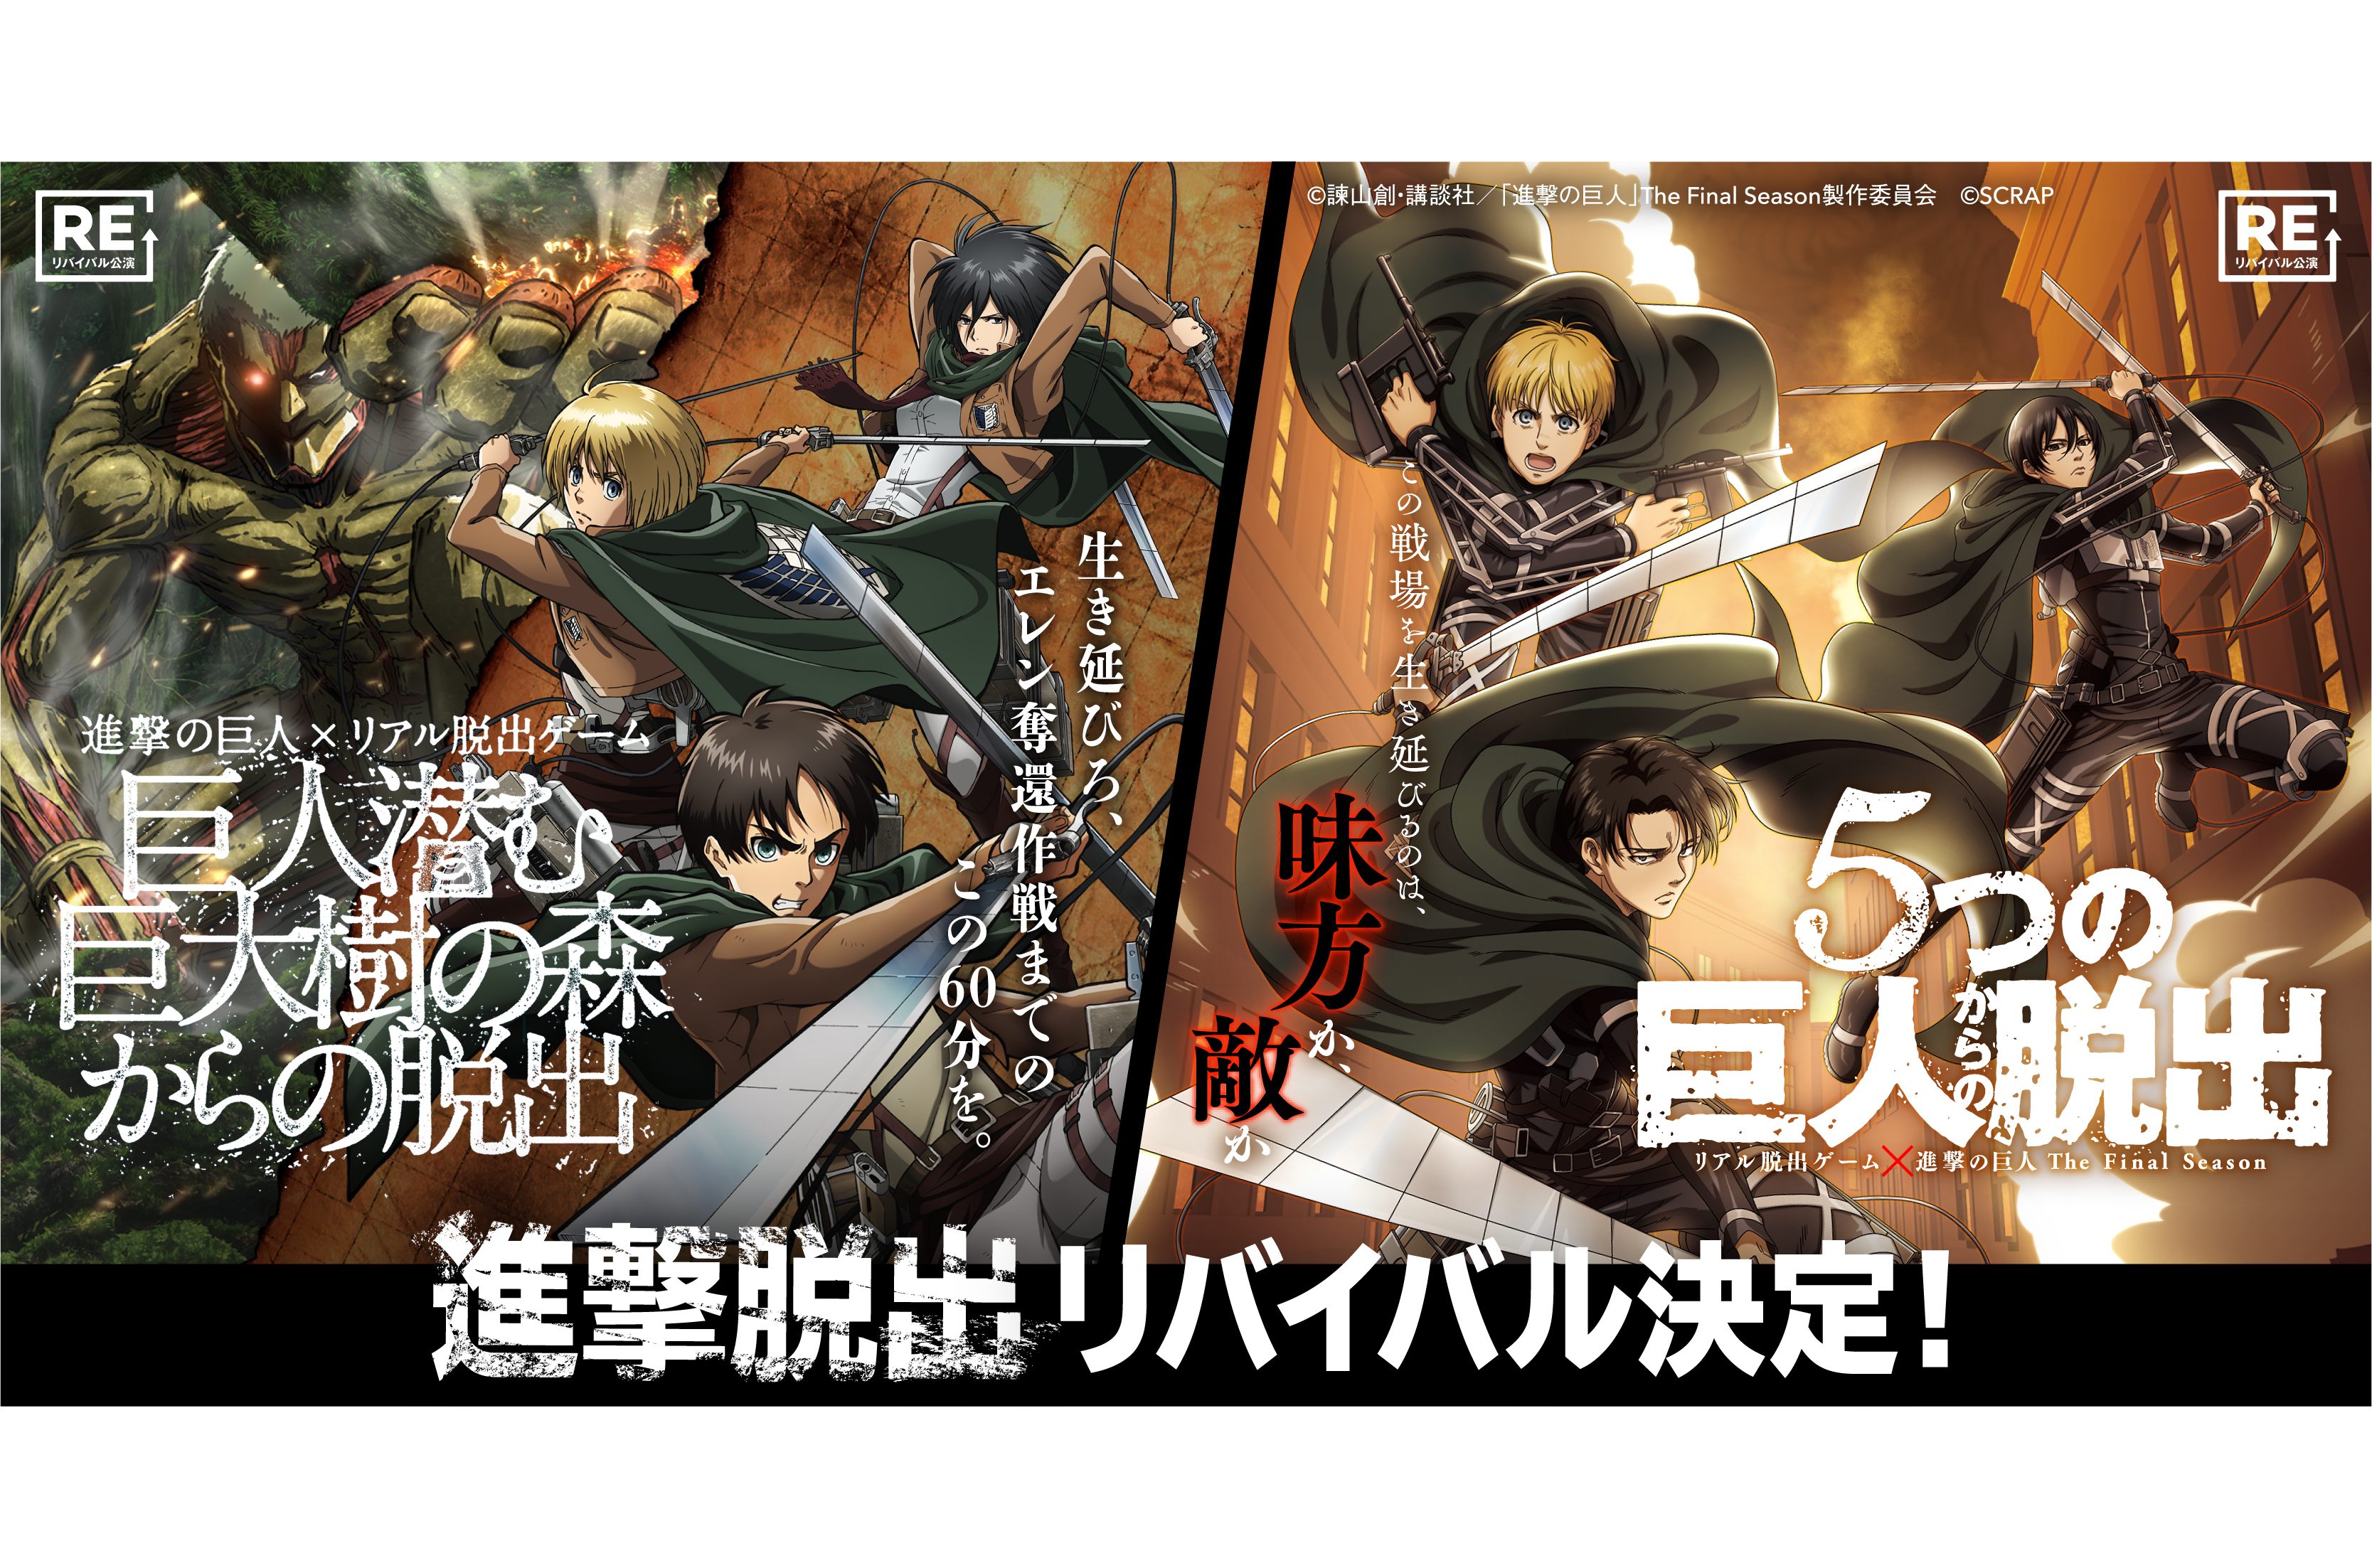 Collaboration Event with Popular Anime “Attack on Titan” Begins in